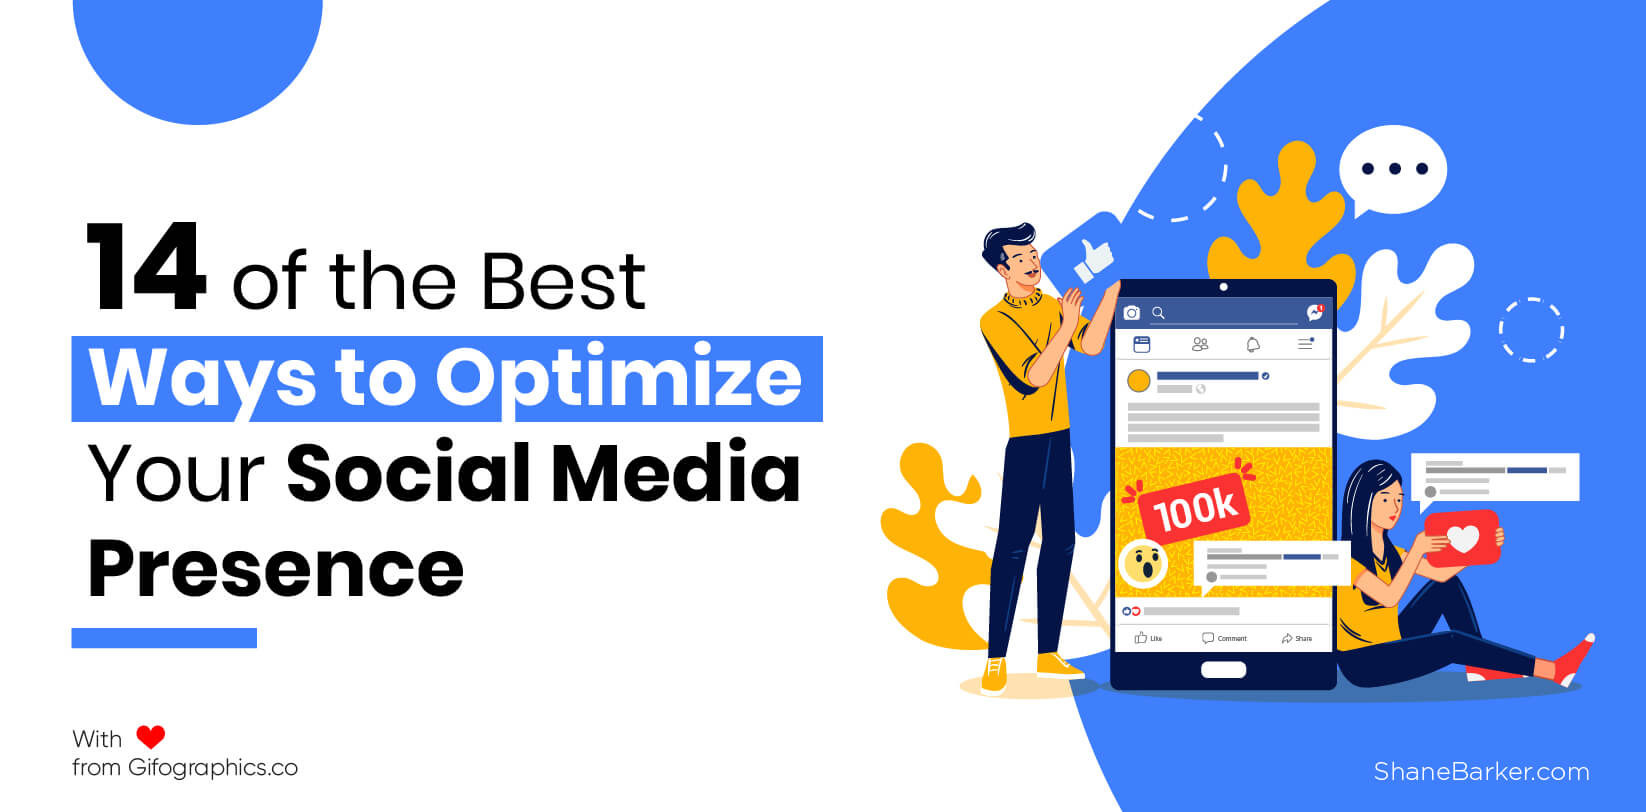 14 of the best ways to optimize your social media presence